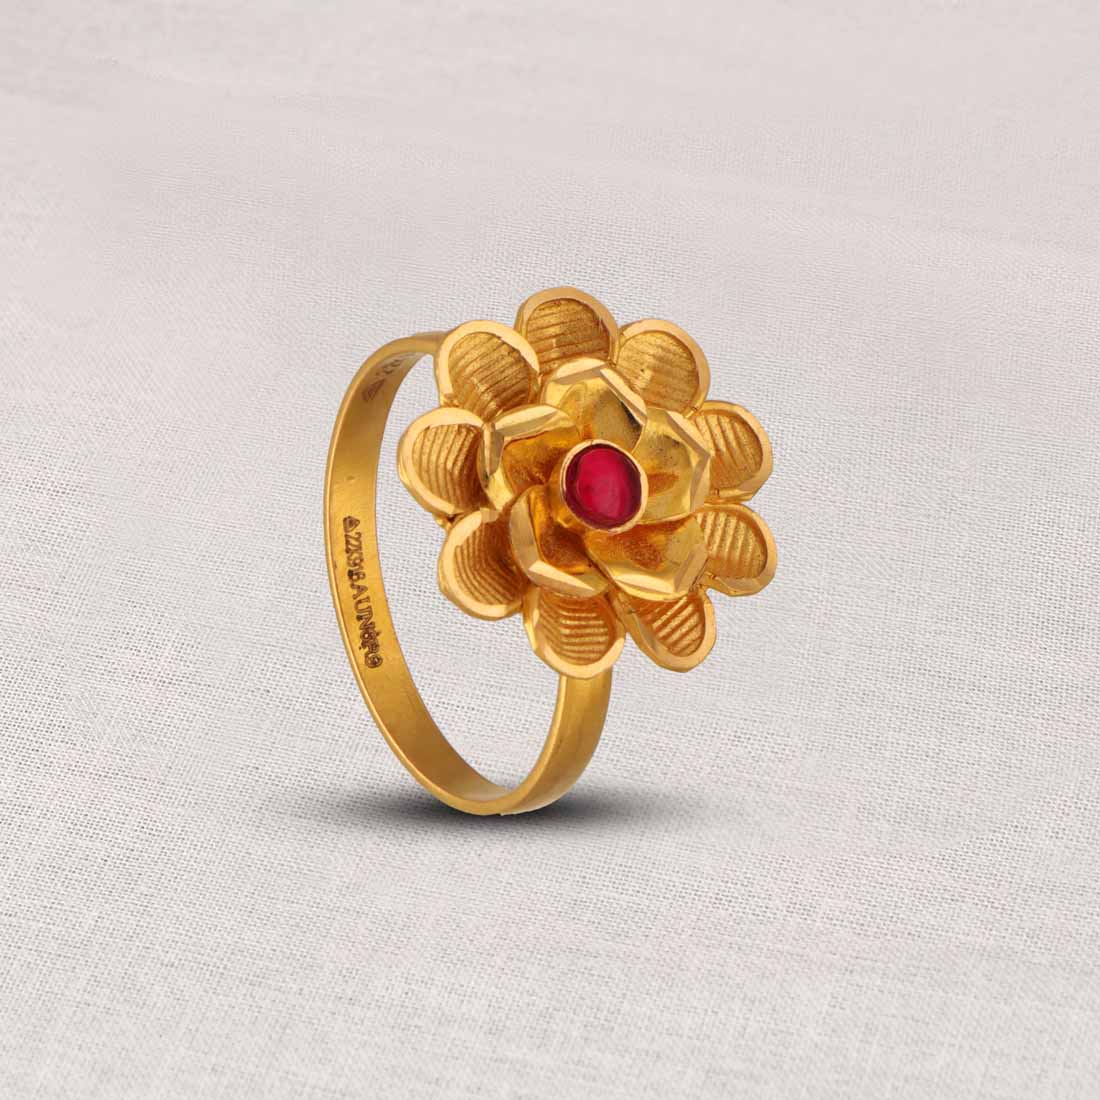 Marco Bicego Marrakech Onde Collection 18K Yellow and White Gold Ring with  Two Diamond Flowers | Lee Michaels Fine Jewelry